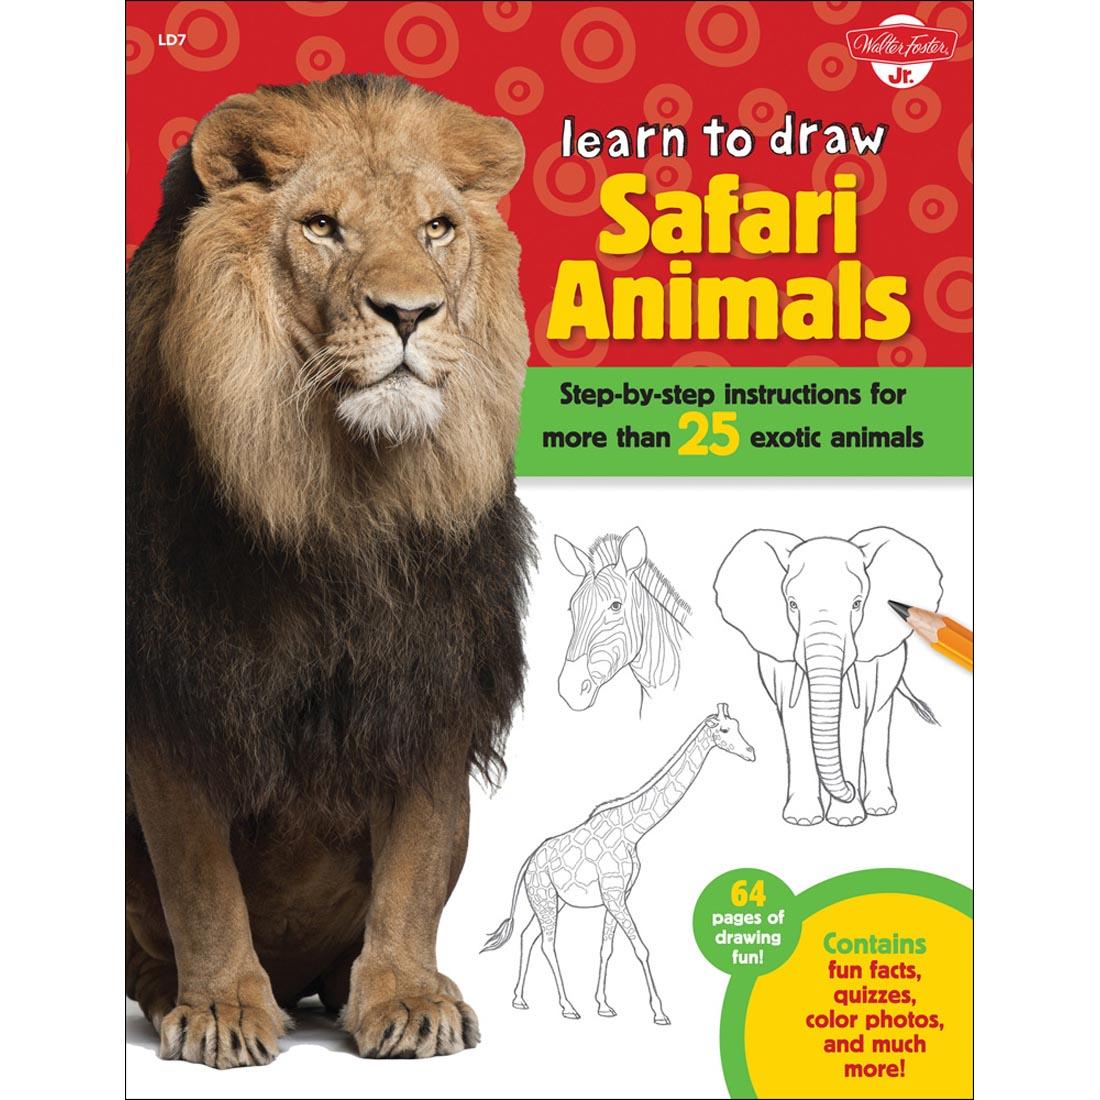 cover of book - Walter Foster Jr. Learn To Draw Safari Animals